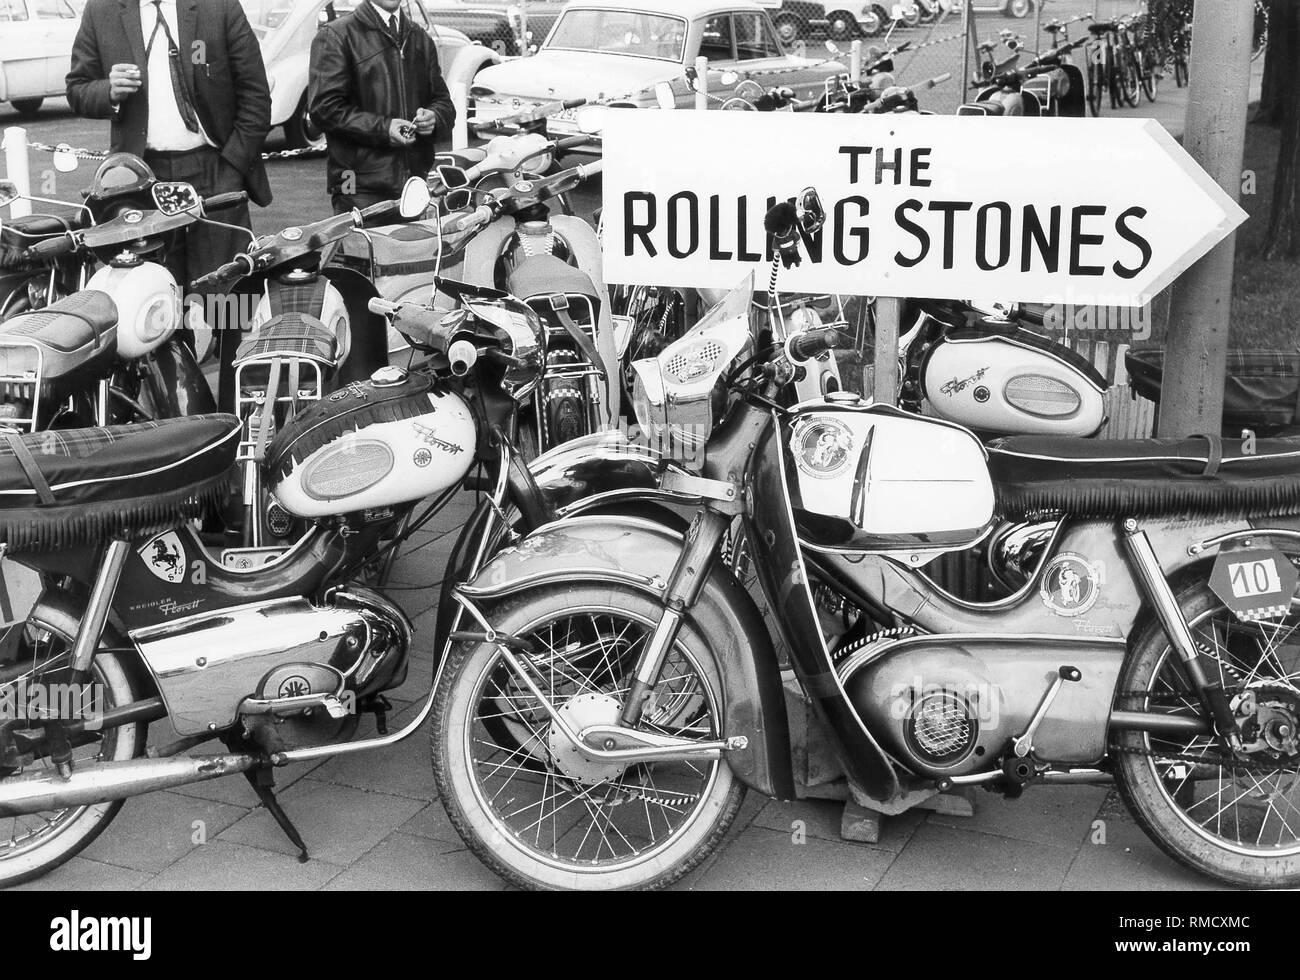 Motorcycles park on an event site, under an information sign pointing to  the concert of "Rolling Stones Stock Photo - Alamy